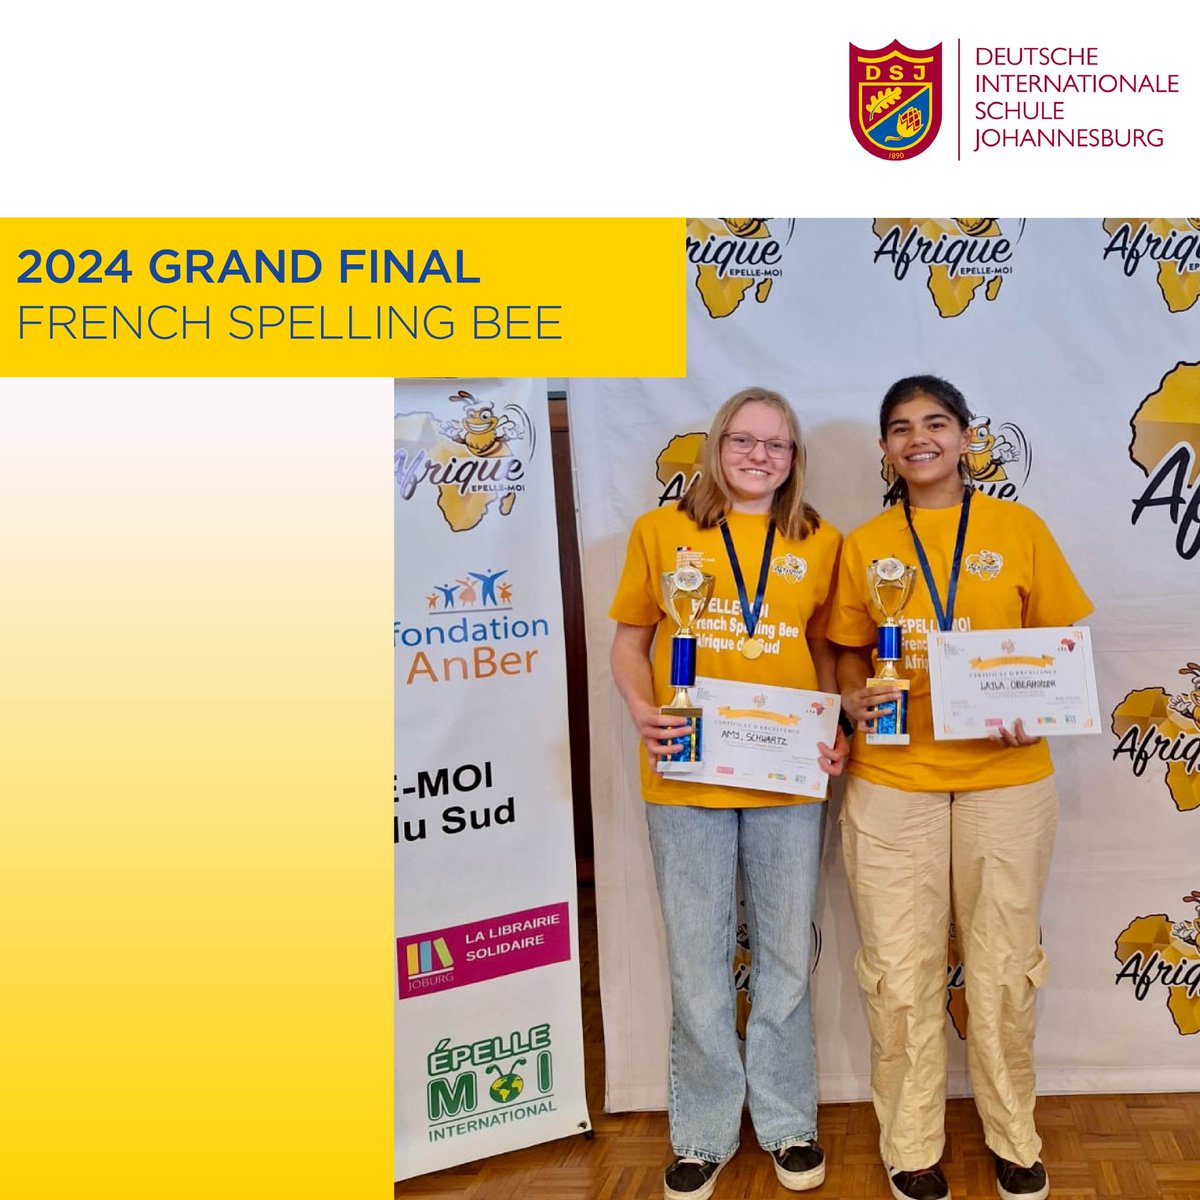 Congratulations to @DSJ_School's Amy Schwartz (11a) and Layla Oberholzer (11b), for their outstanding performances in reaching 2nd and 3rd places respectively, in this year's French spelling bee competition 'Épelle-Moi Afrique du Sud'. #EinsatzDSJ #StrongerTogether